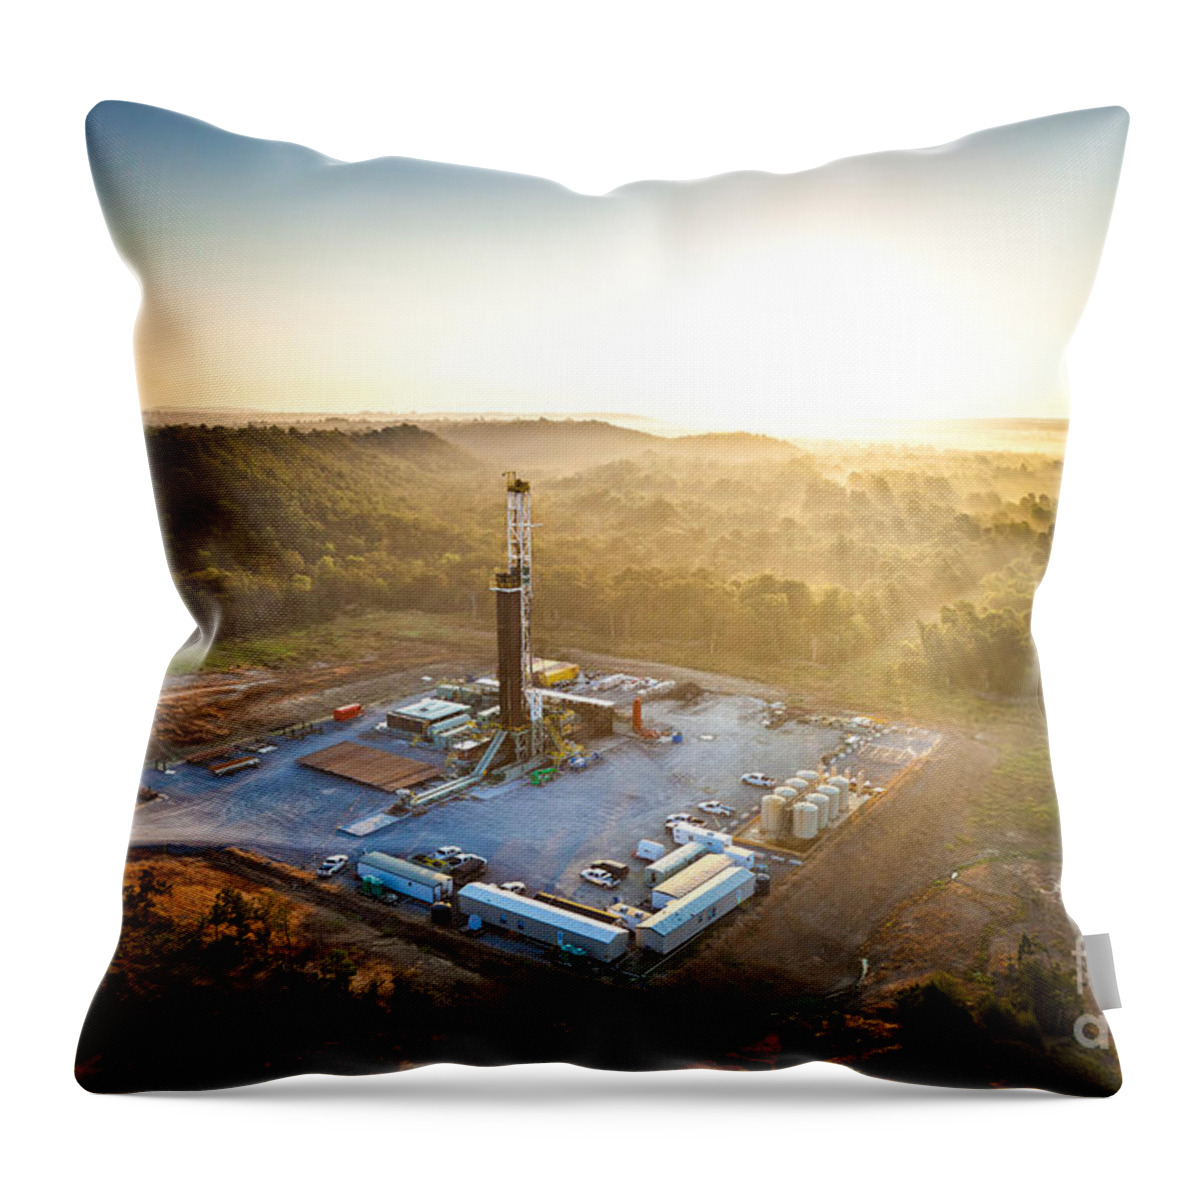 Voil Rig Throw Pillow featuring the photograph Cac004-7 by Cooper Ross